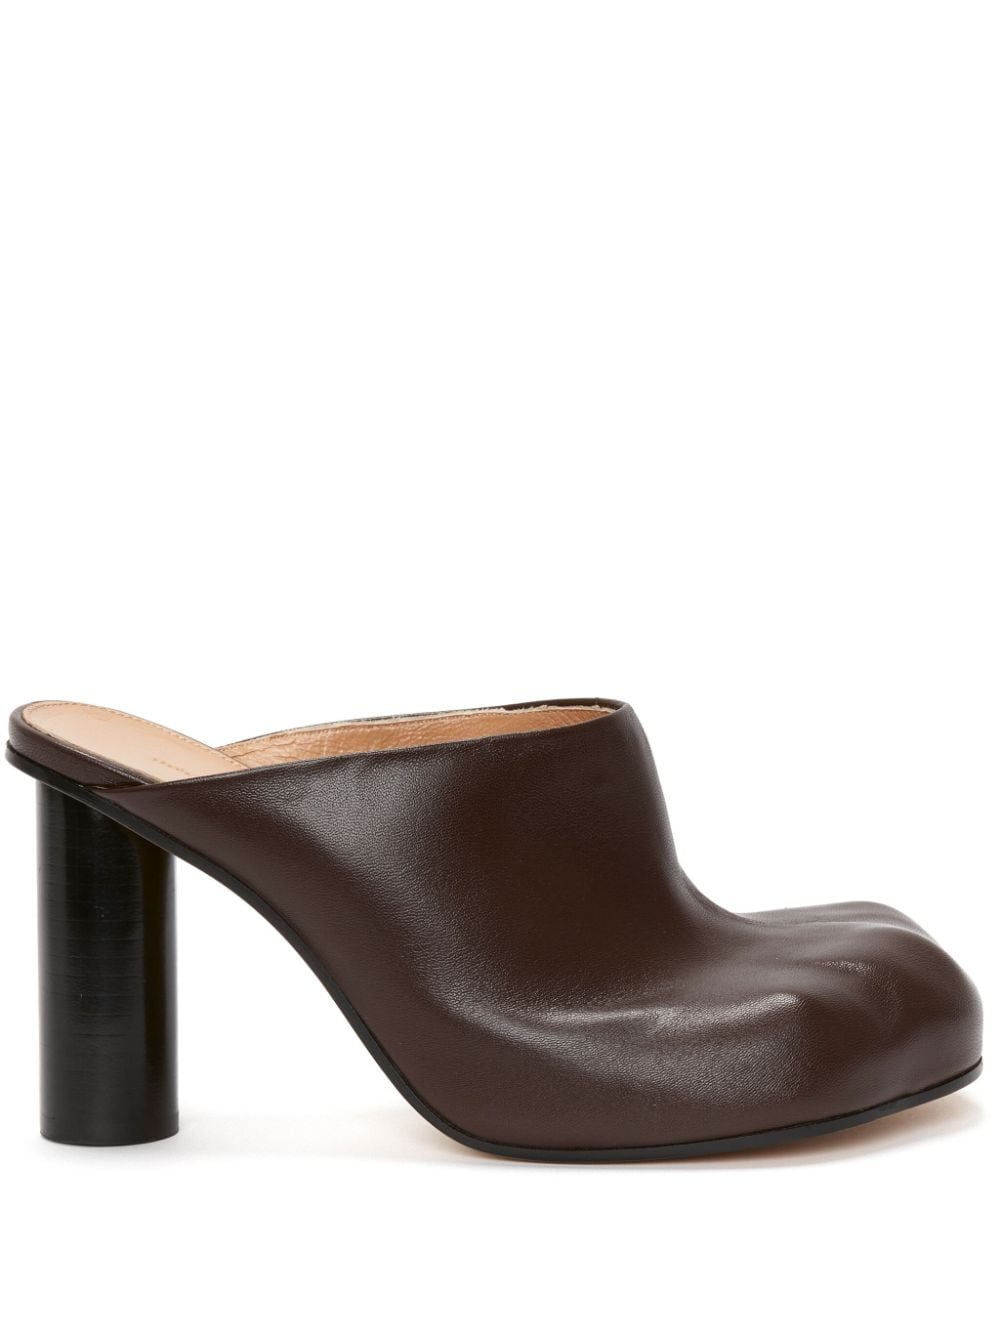 JW Anderson Paw leather mules - Brown von JW Anderson